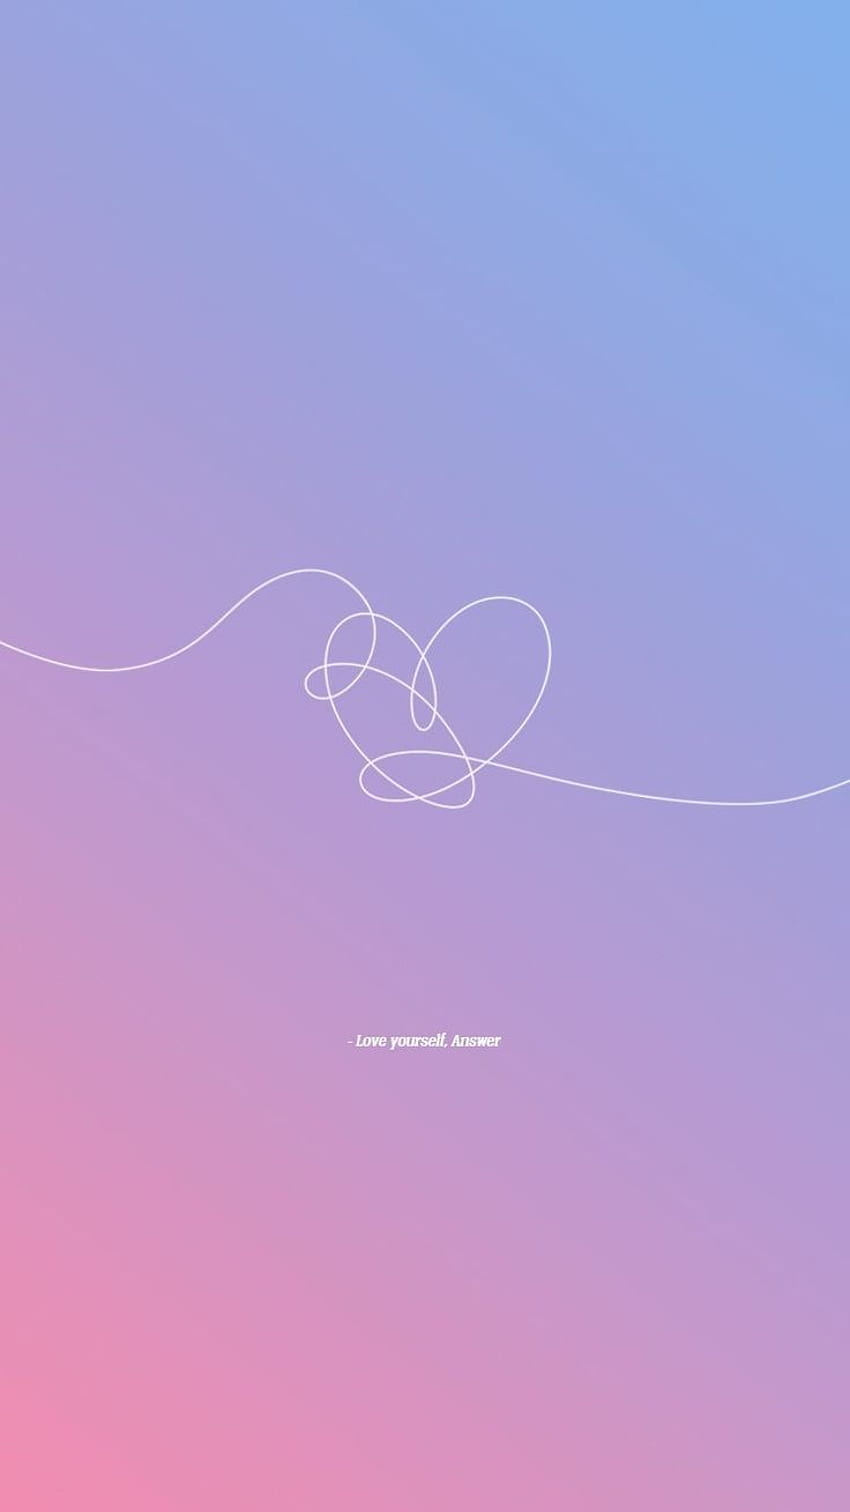 visit for more bts love yourself answer HD phone wallpaper